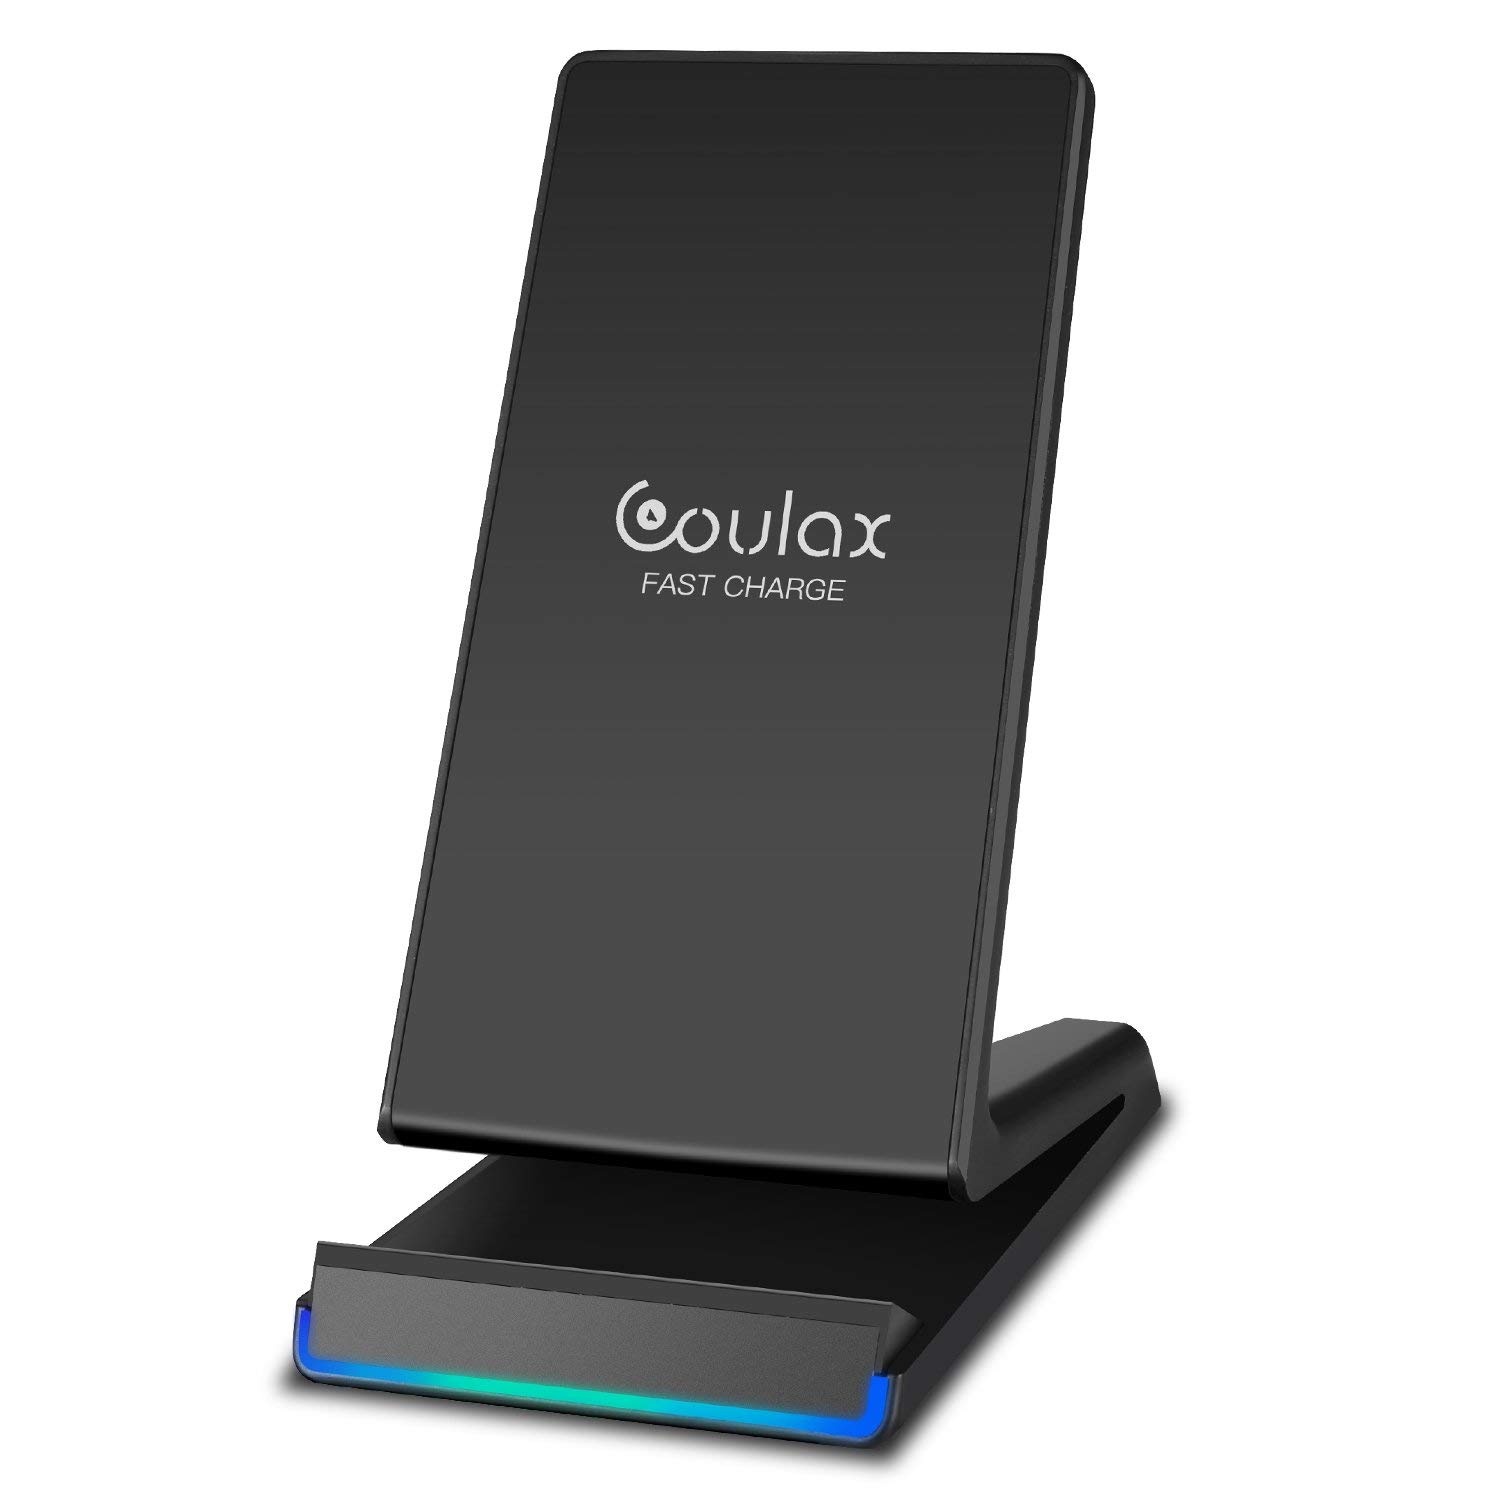 Papij Deals: COULAX Fast Qi Wireless Charging Pad for $6.49 (Reg.$12.99 ...